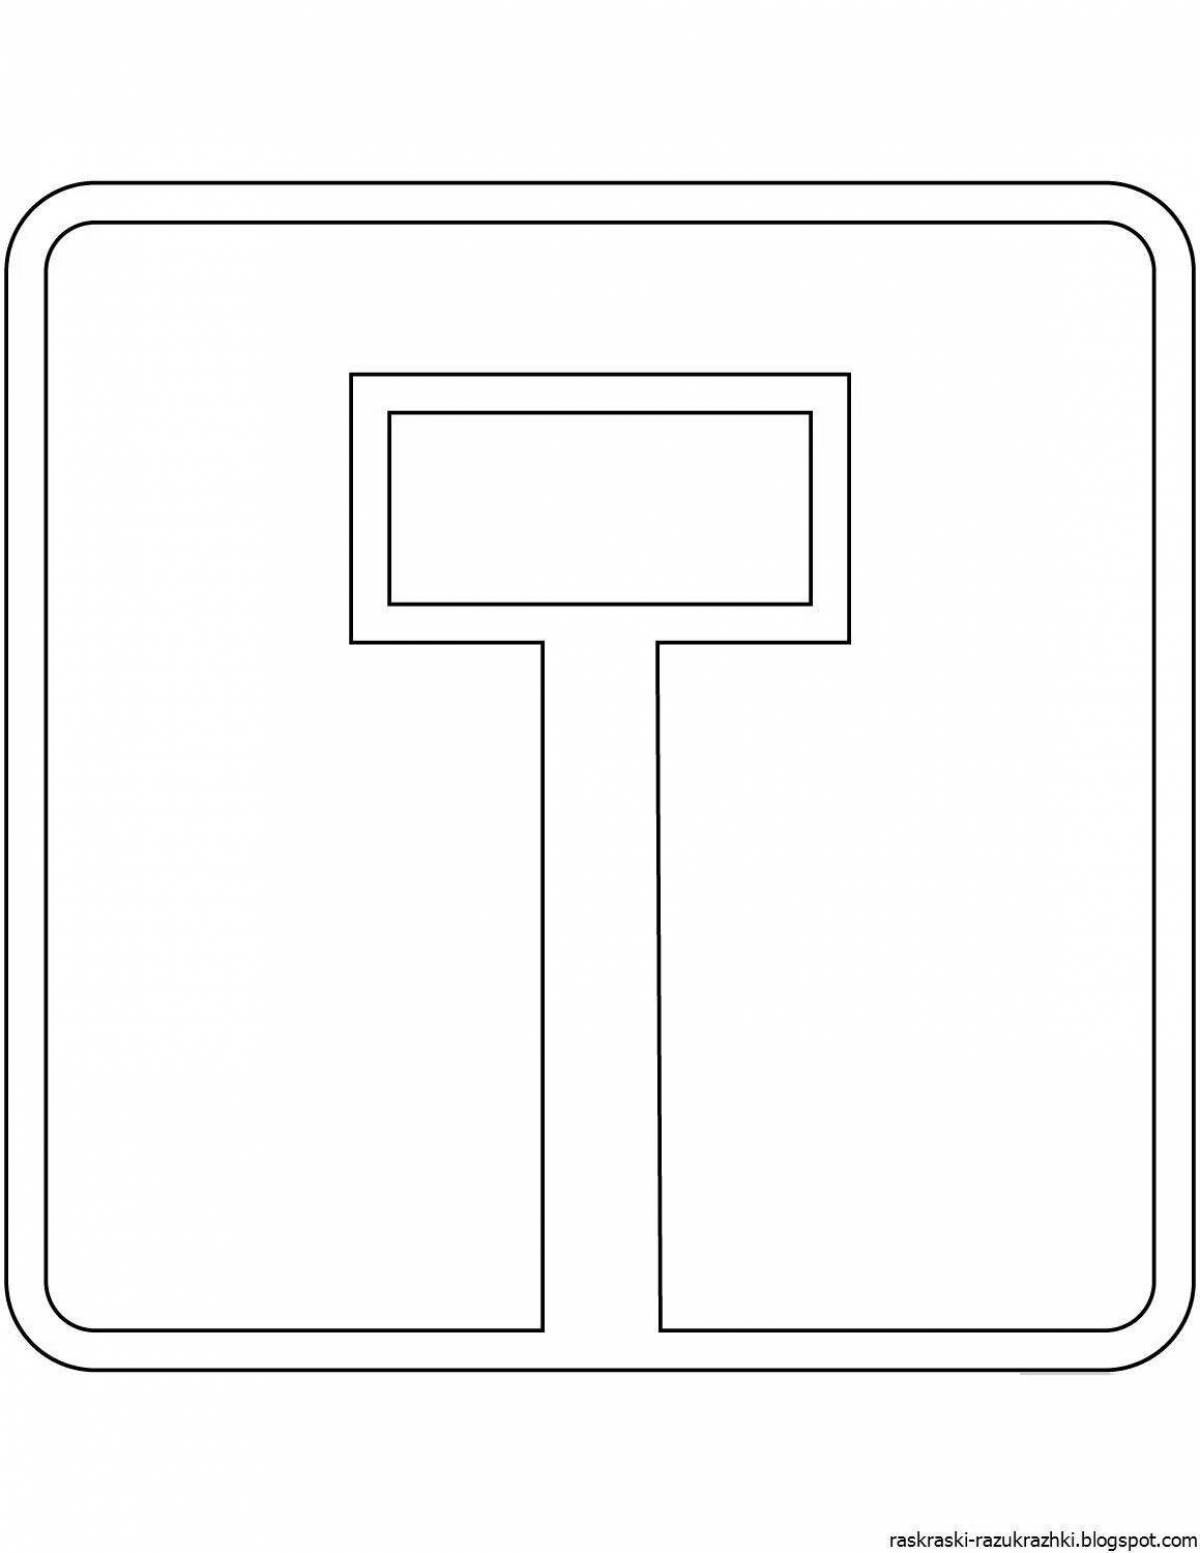 Coloring page animated main road sign